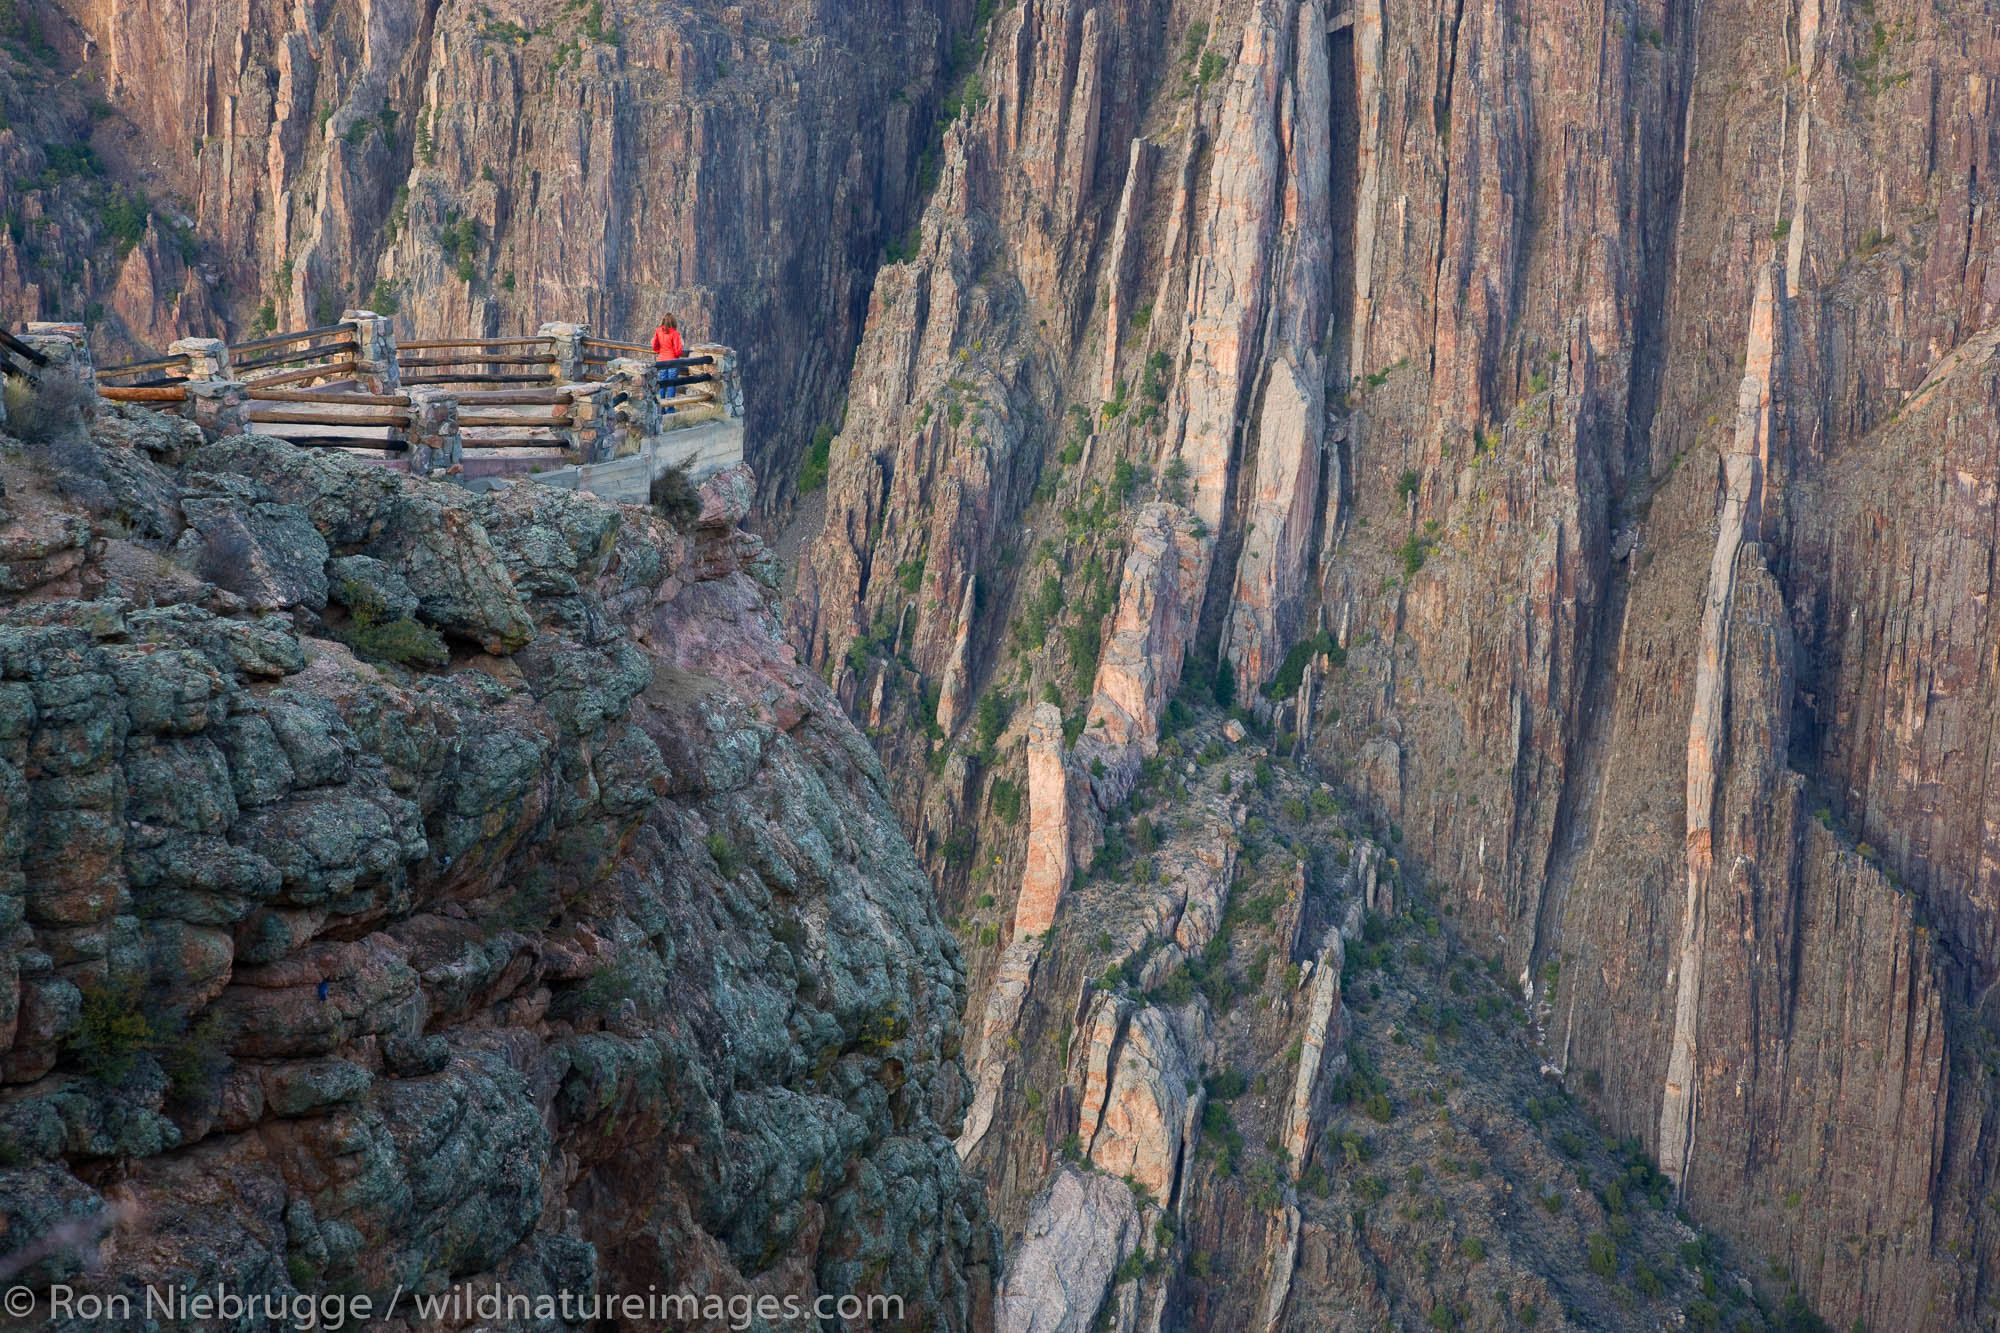 A hiker enjoys the viewpoint at Gunnison Point, Black Canyon of the Gunnison National Park, Colorado.  (model released)